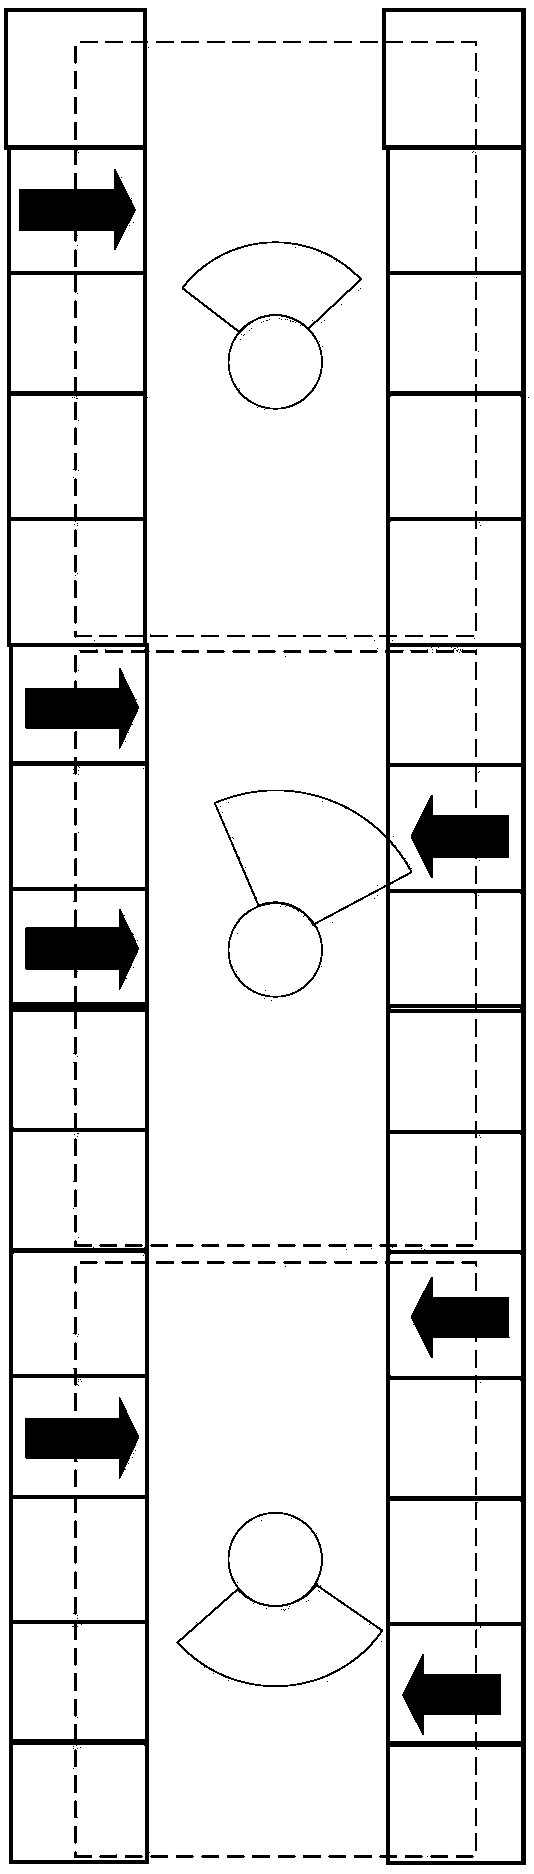 Parking stall detection method based on shooting equipment layout